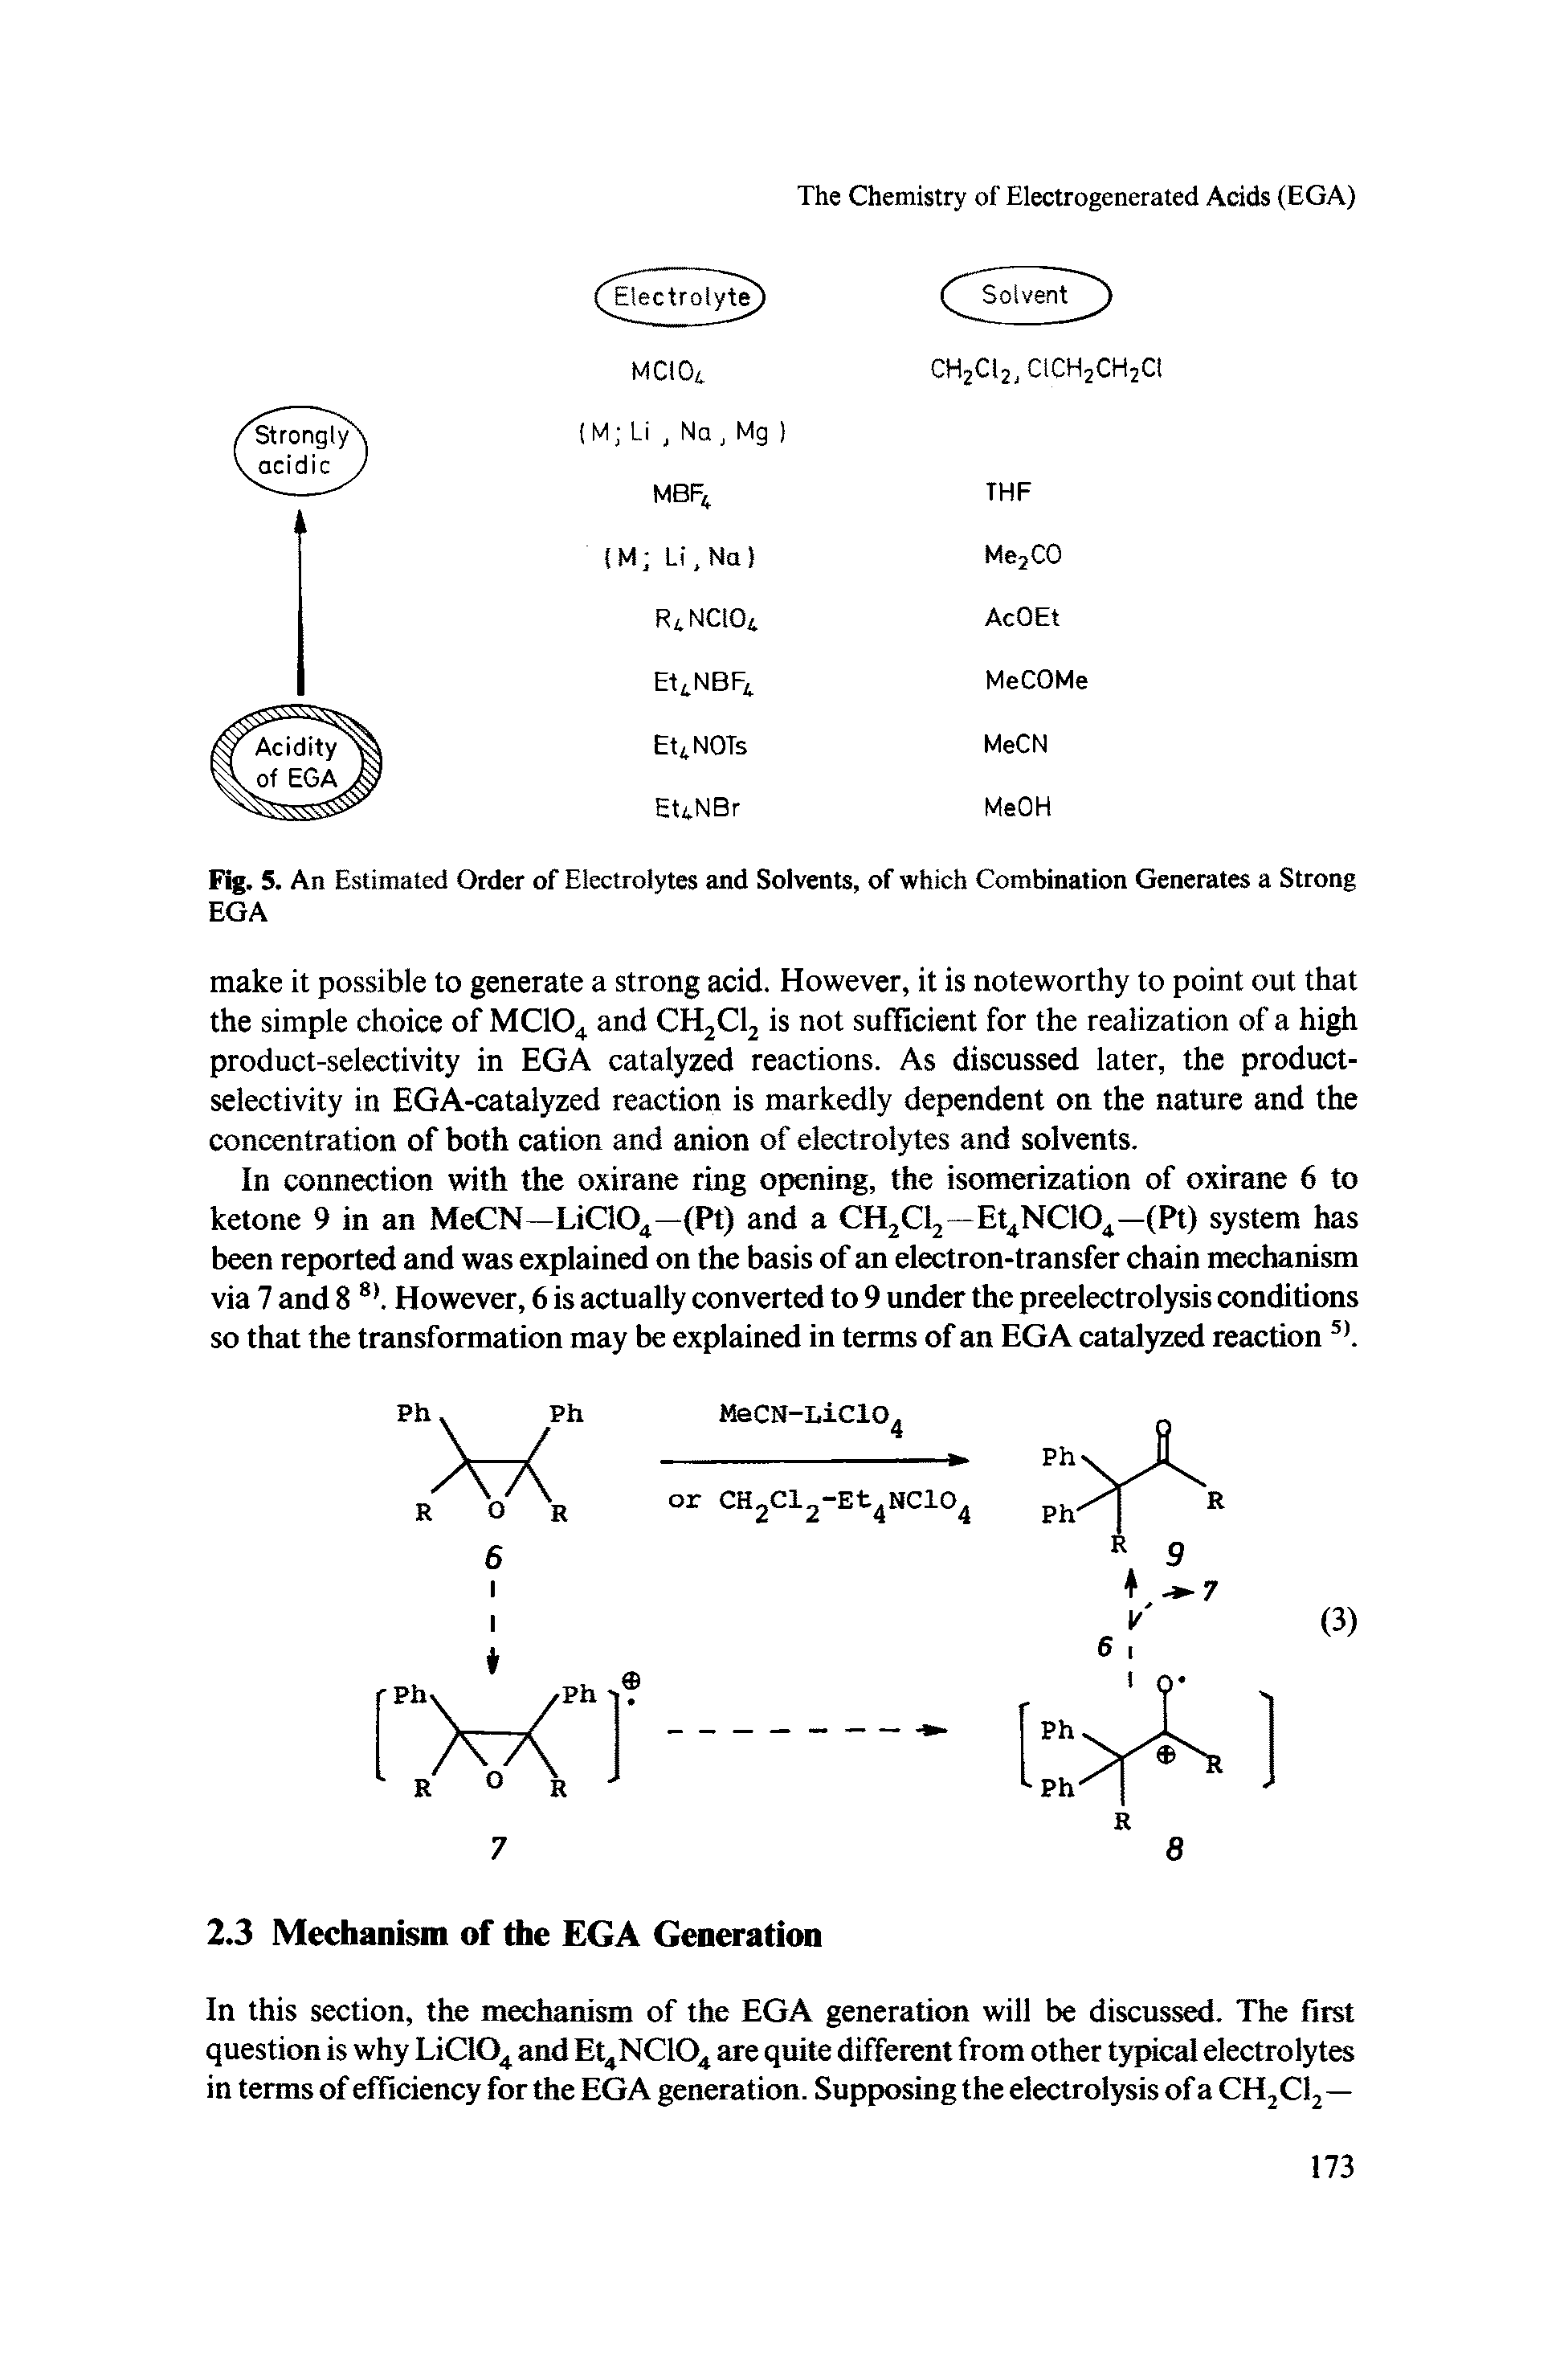 Fig. 5. An Estimated Order of Electrolytes and Solvents, of which Combination Generates a Strong EGA...